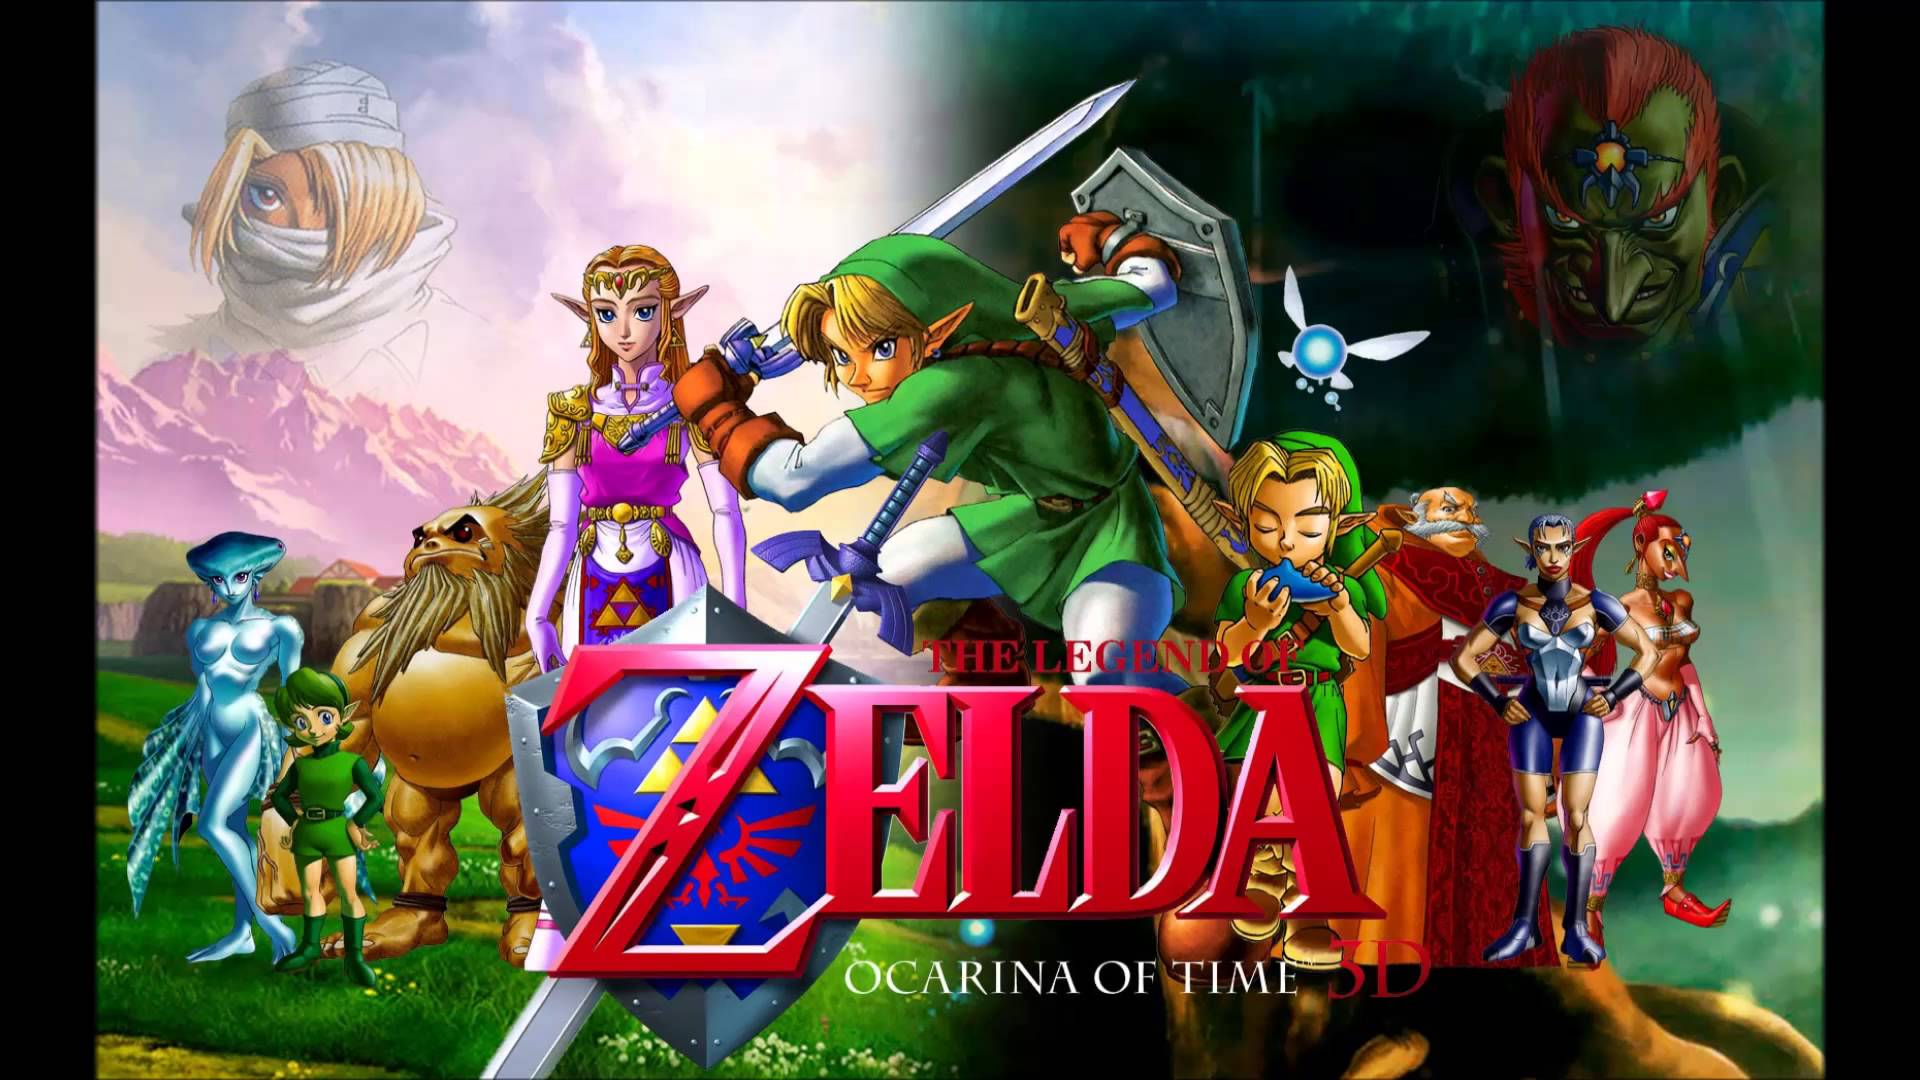 Panoramic Wallpapers The Legend Of Zelda: Ocarina Of Time 